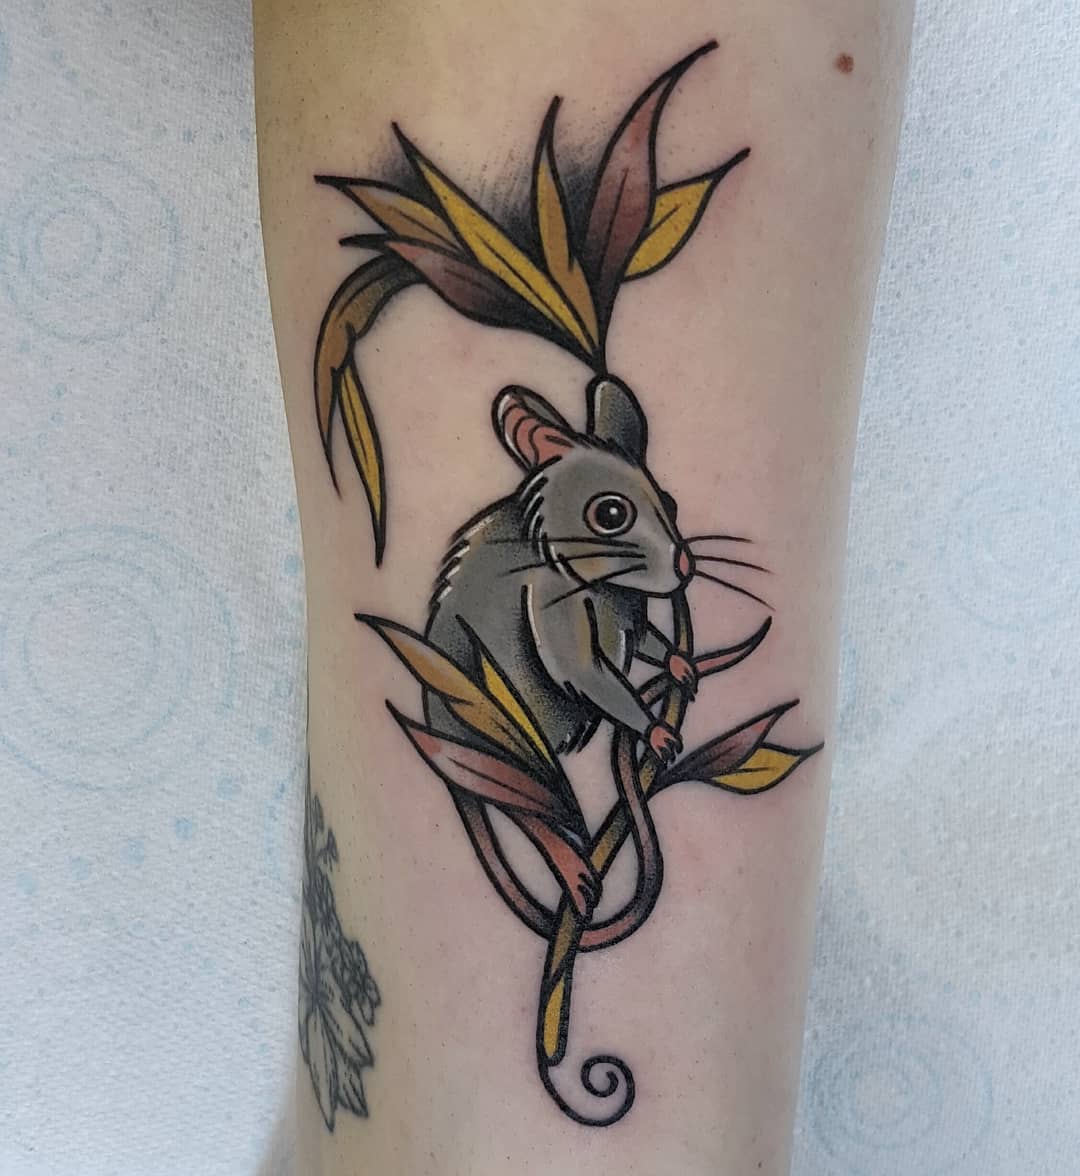 Mouse by @rabtattoo